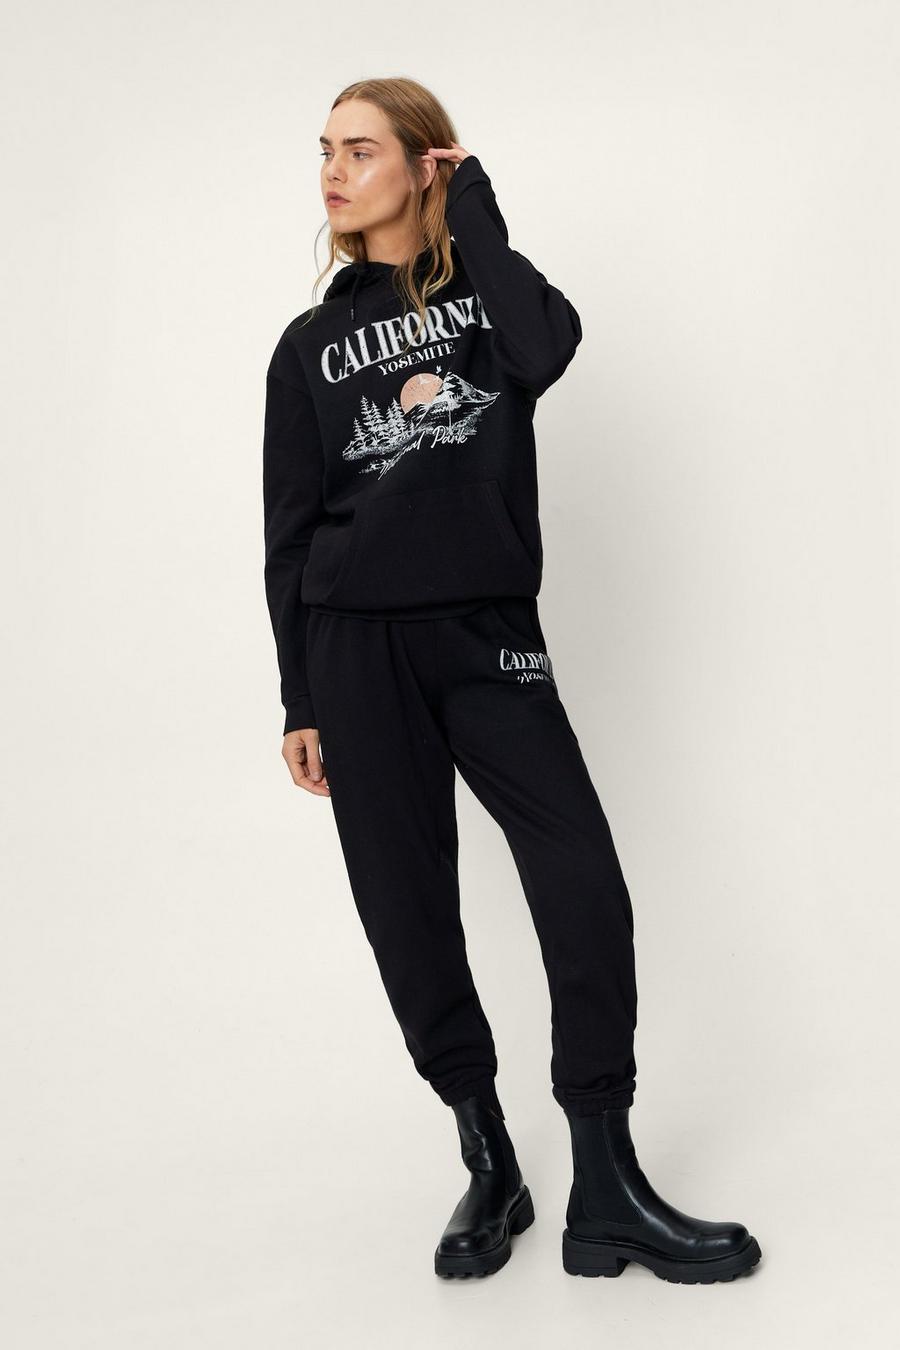 California Graphic Oversized Hoodie and Jogger Set